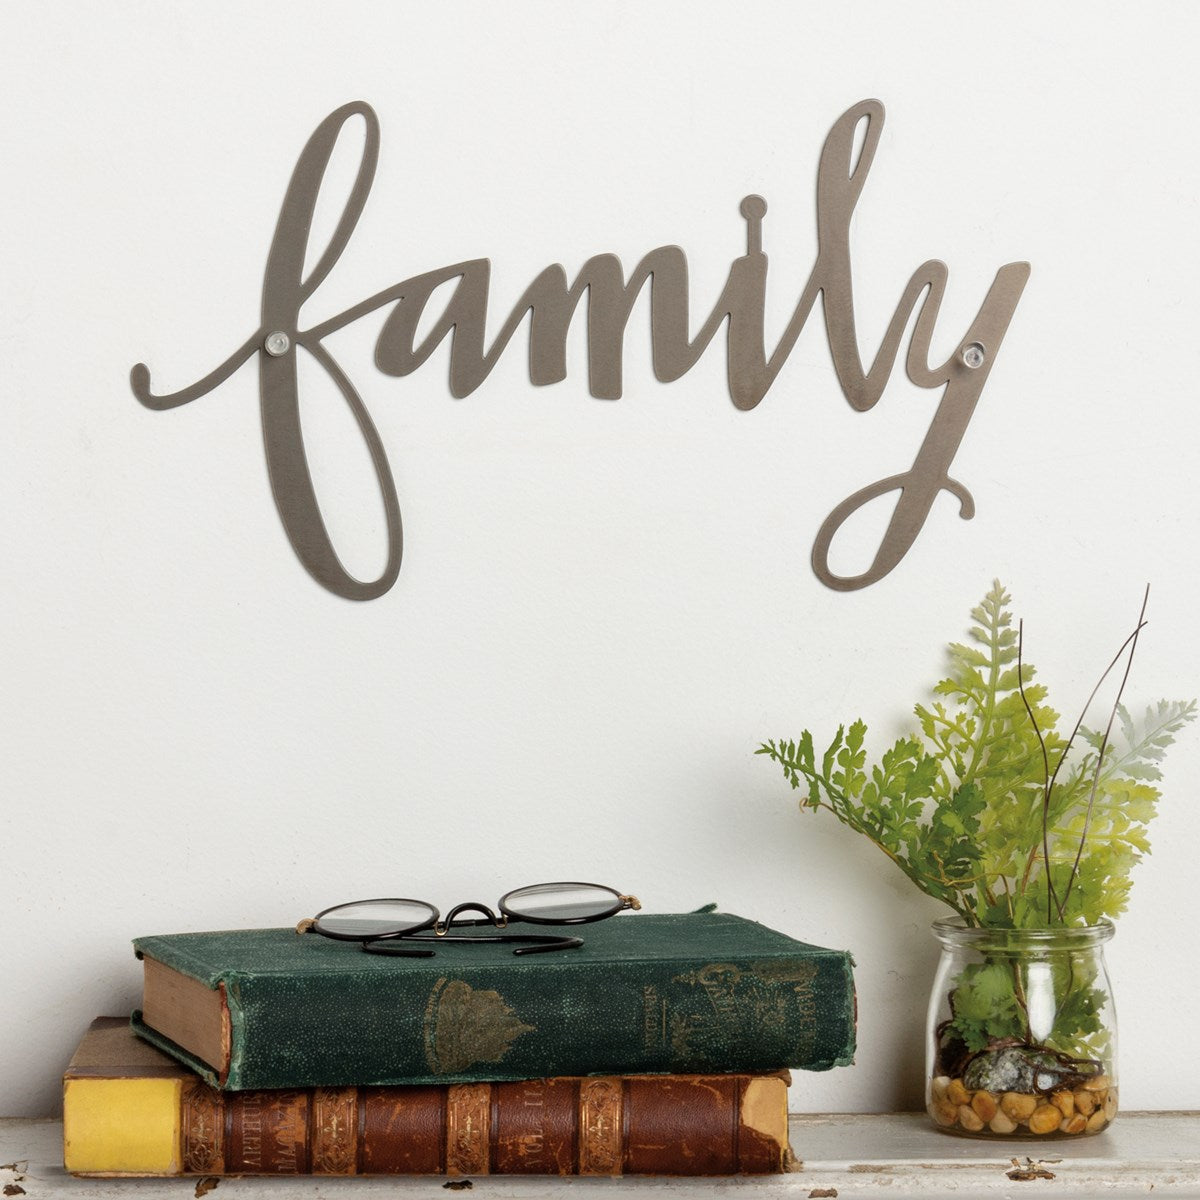 Tin Family Script Cut-out Sign